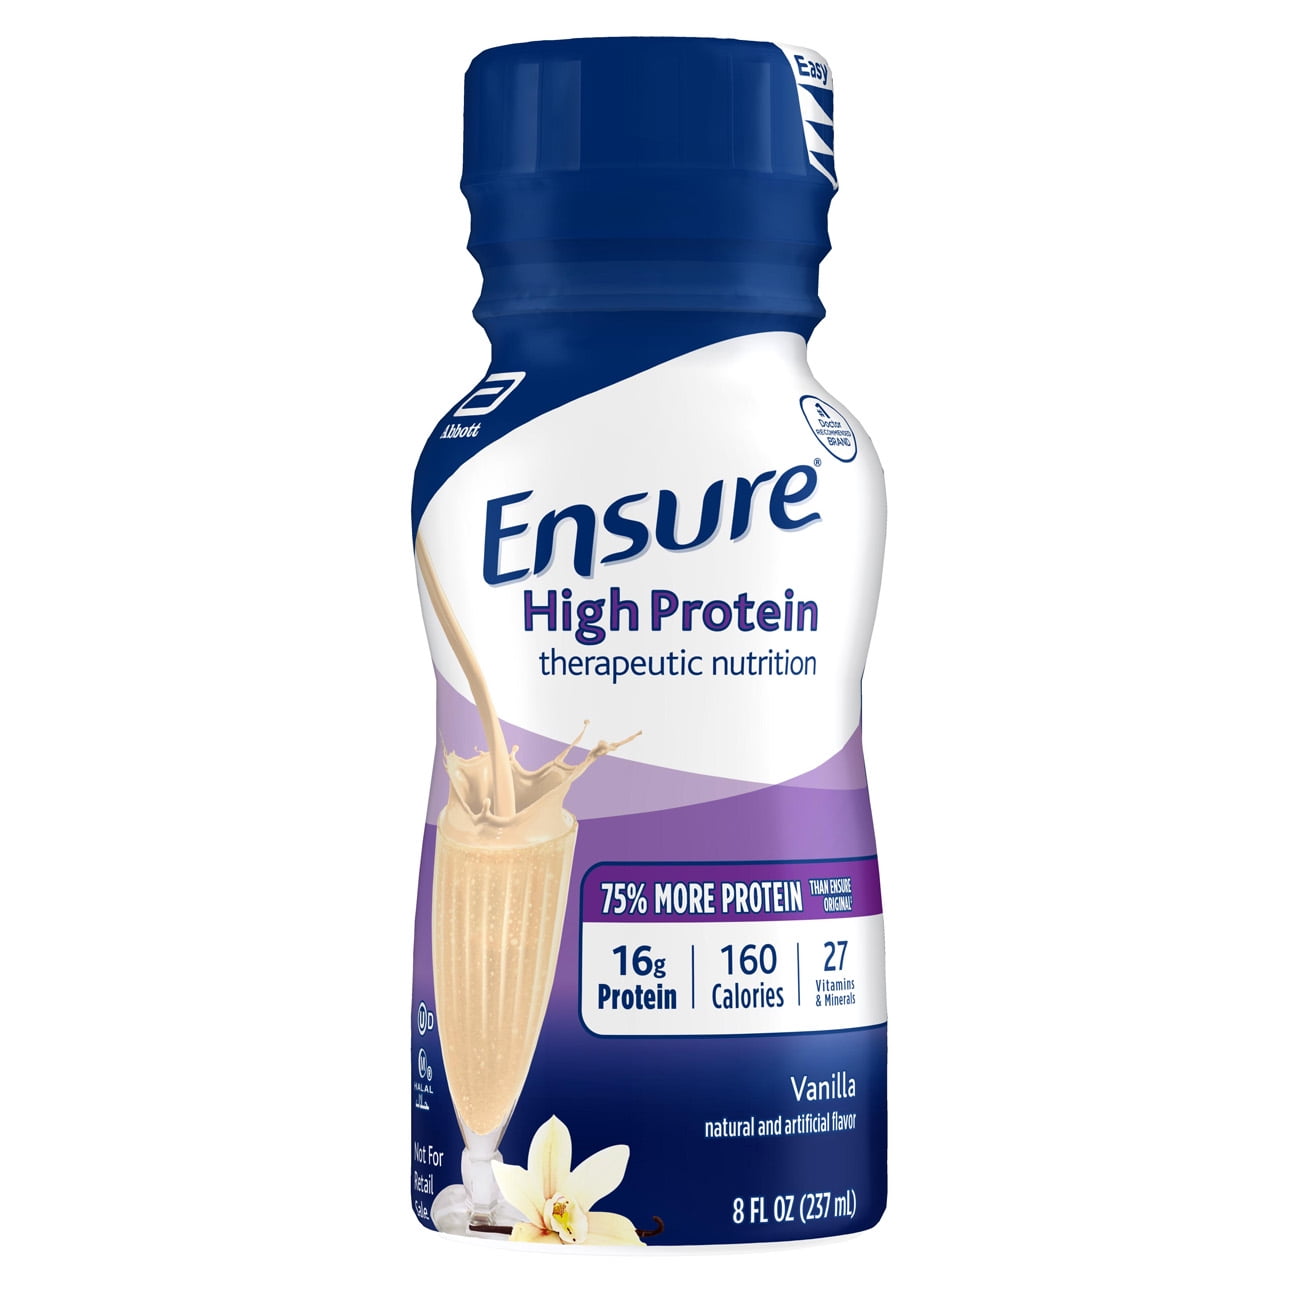 ensure-high-protein-nutritional-shake-with-16g-of-high-quality-protein